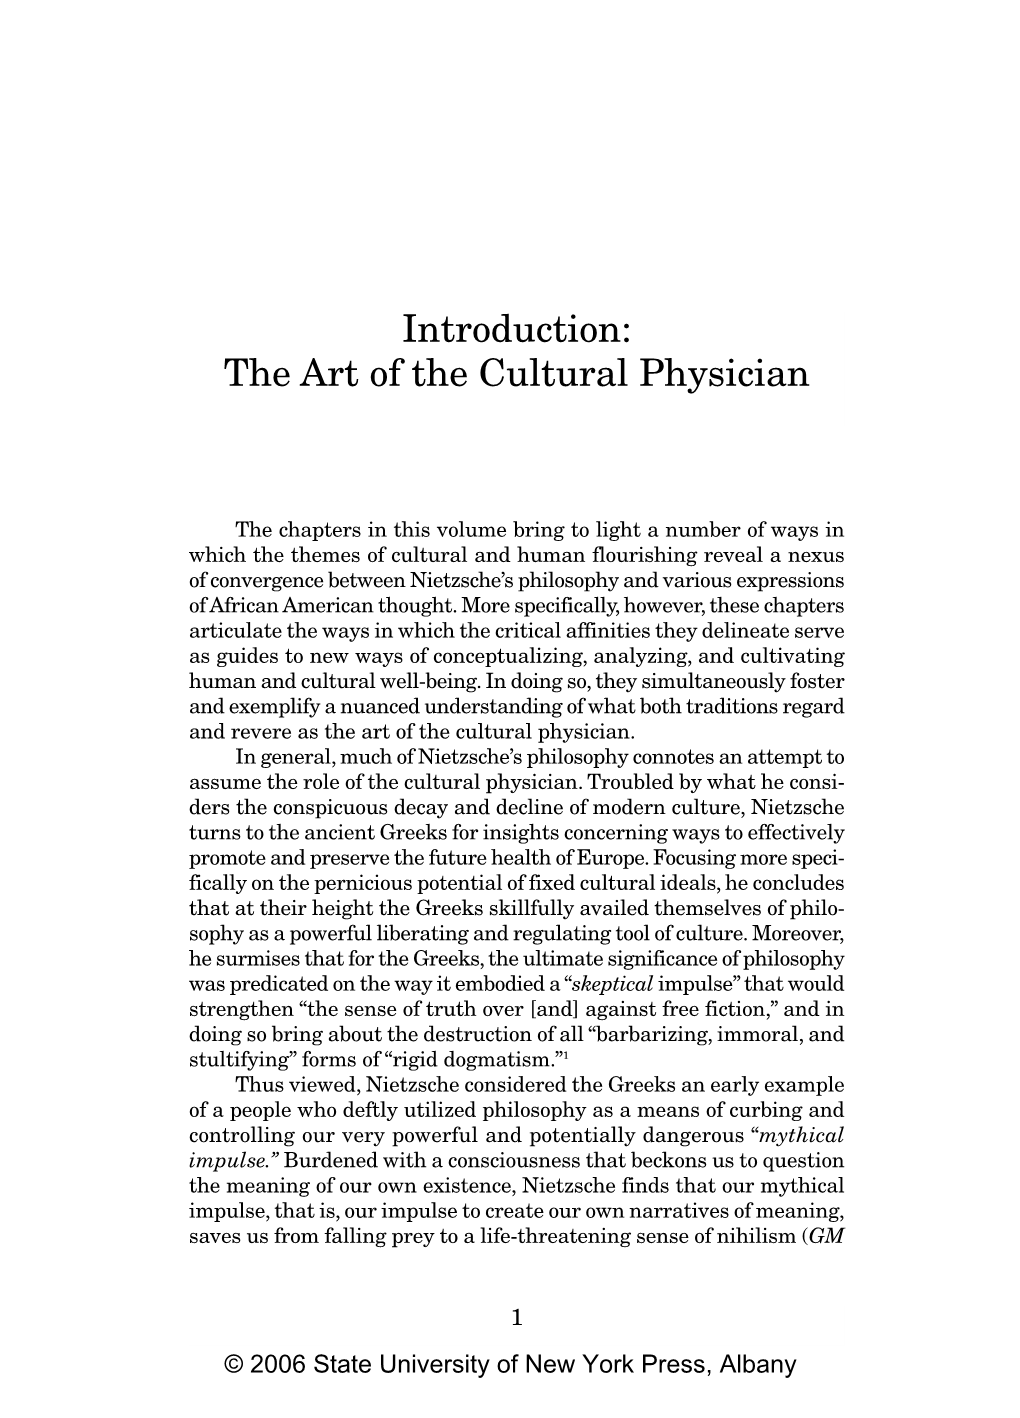 Introduction: the Art of the Cultural Physician